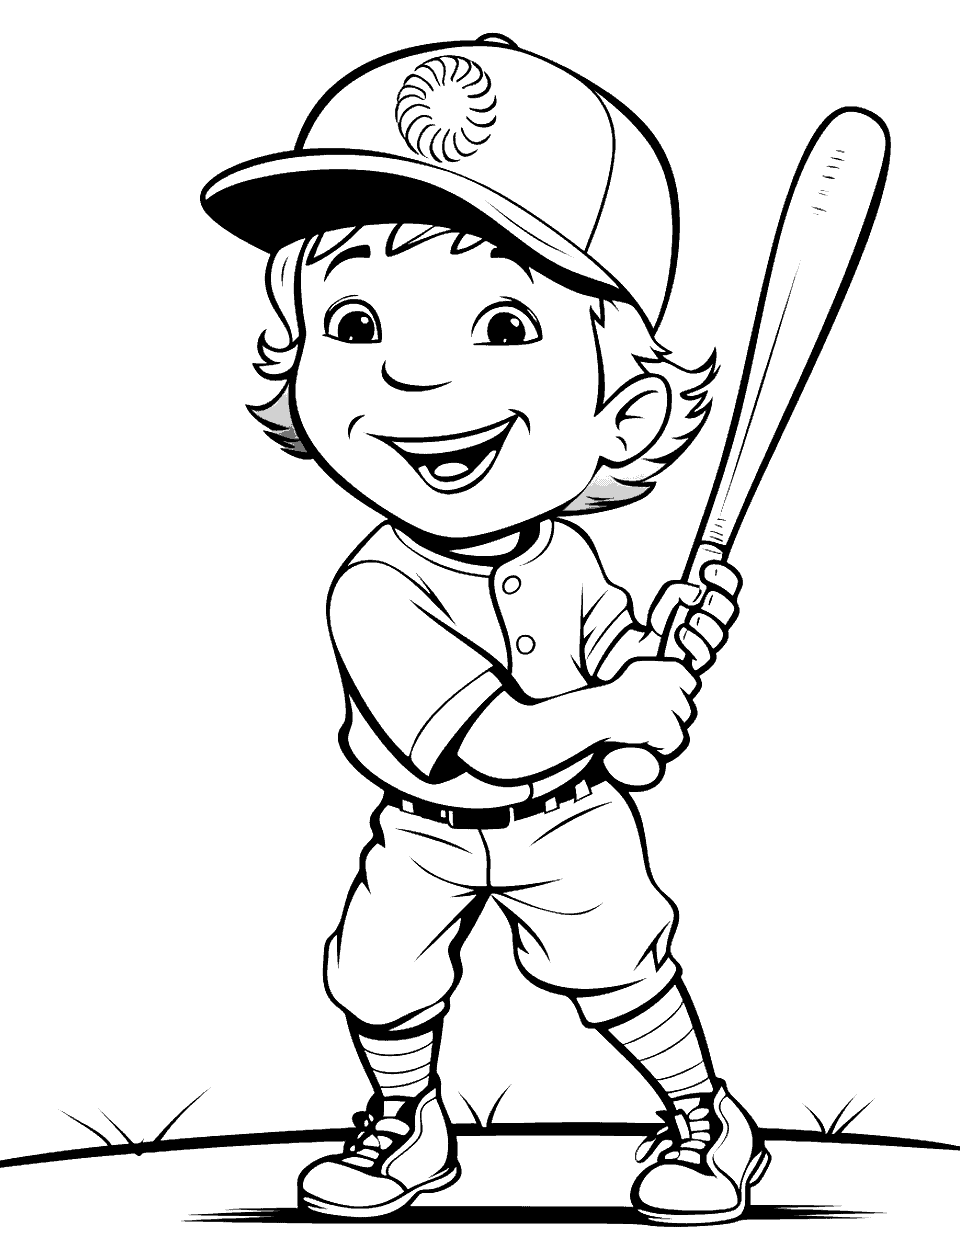 Rookie's First Hit Baseball Coloring Page - A rookie player hitting their first major league hit, with a look of excitement and accomplishment.